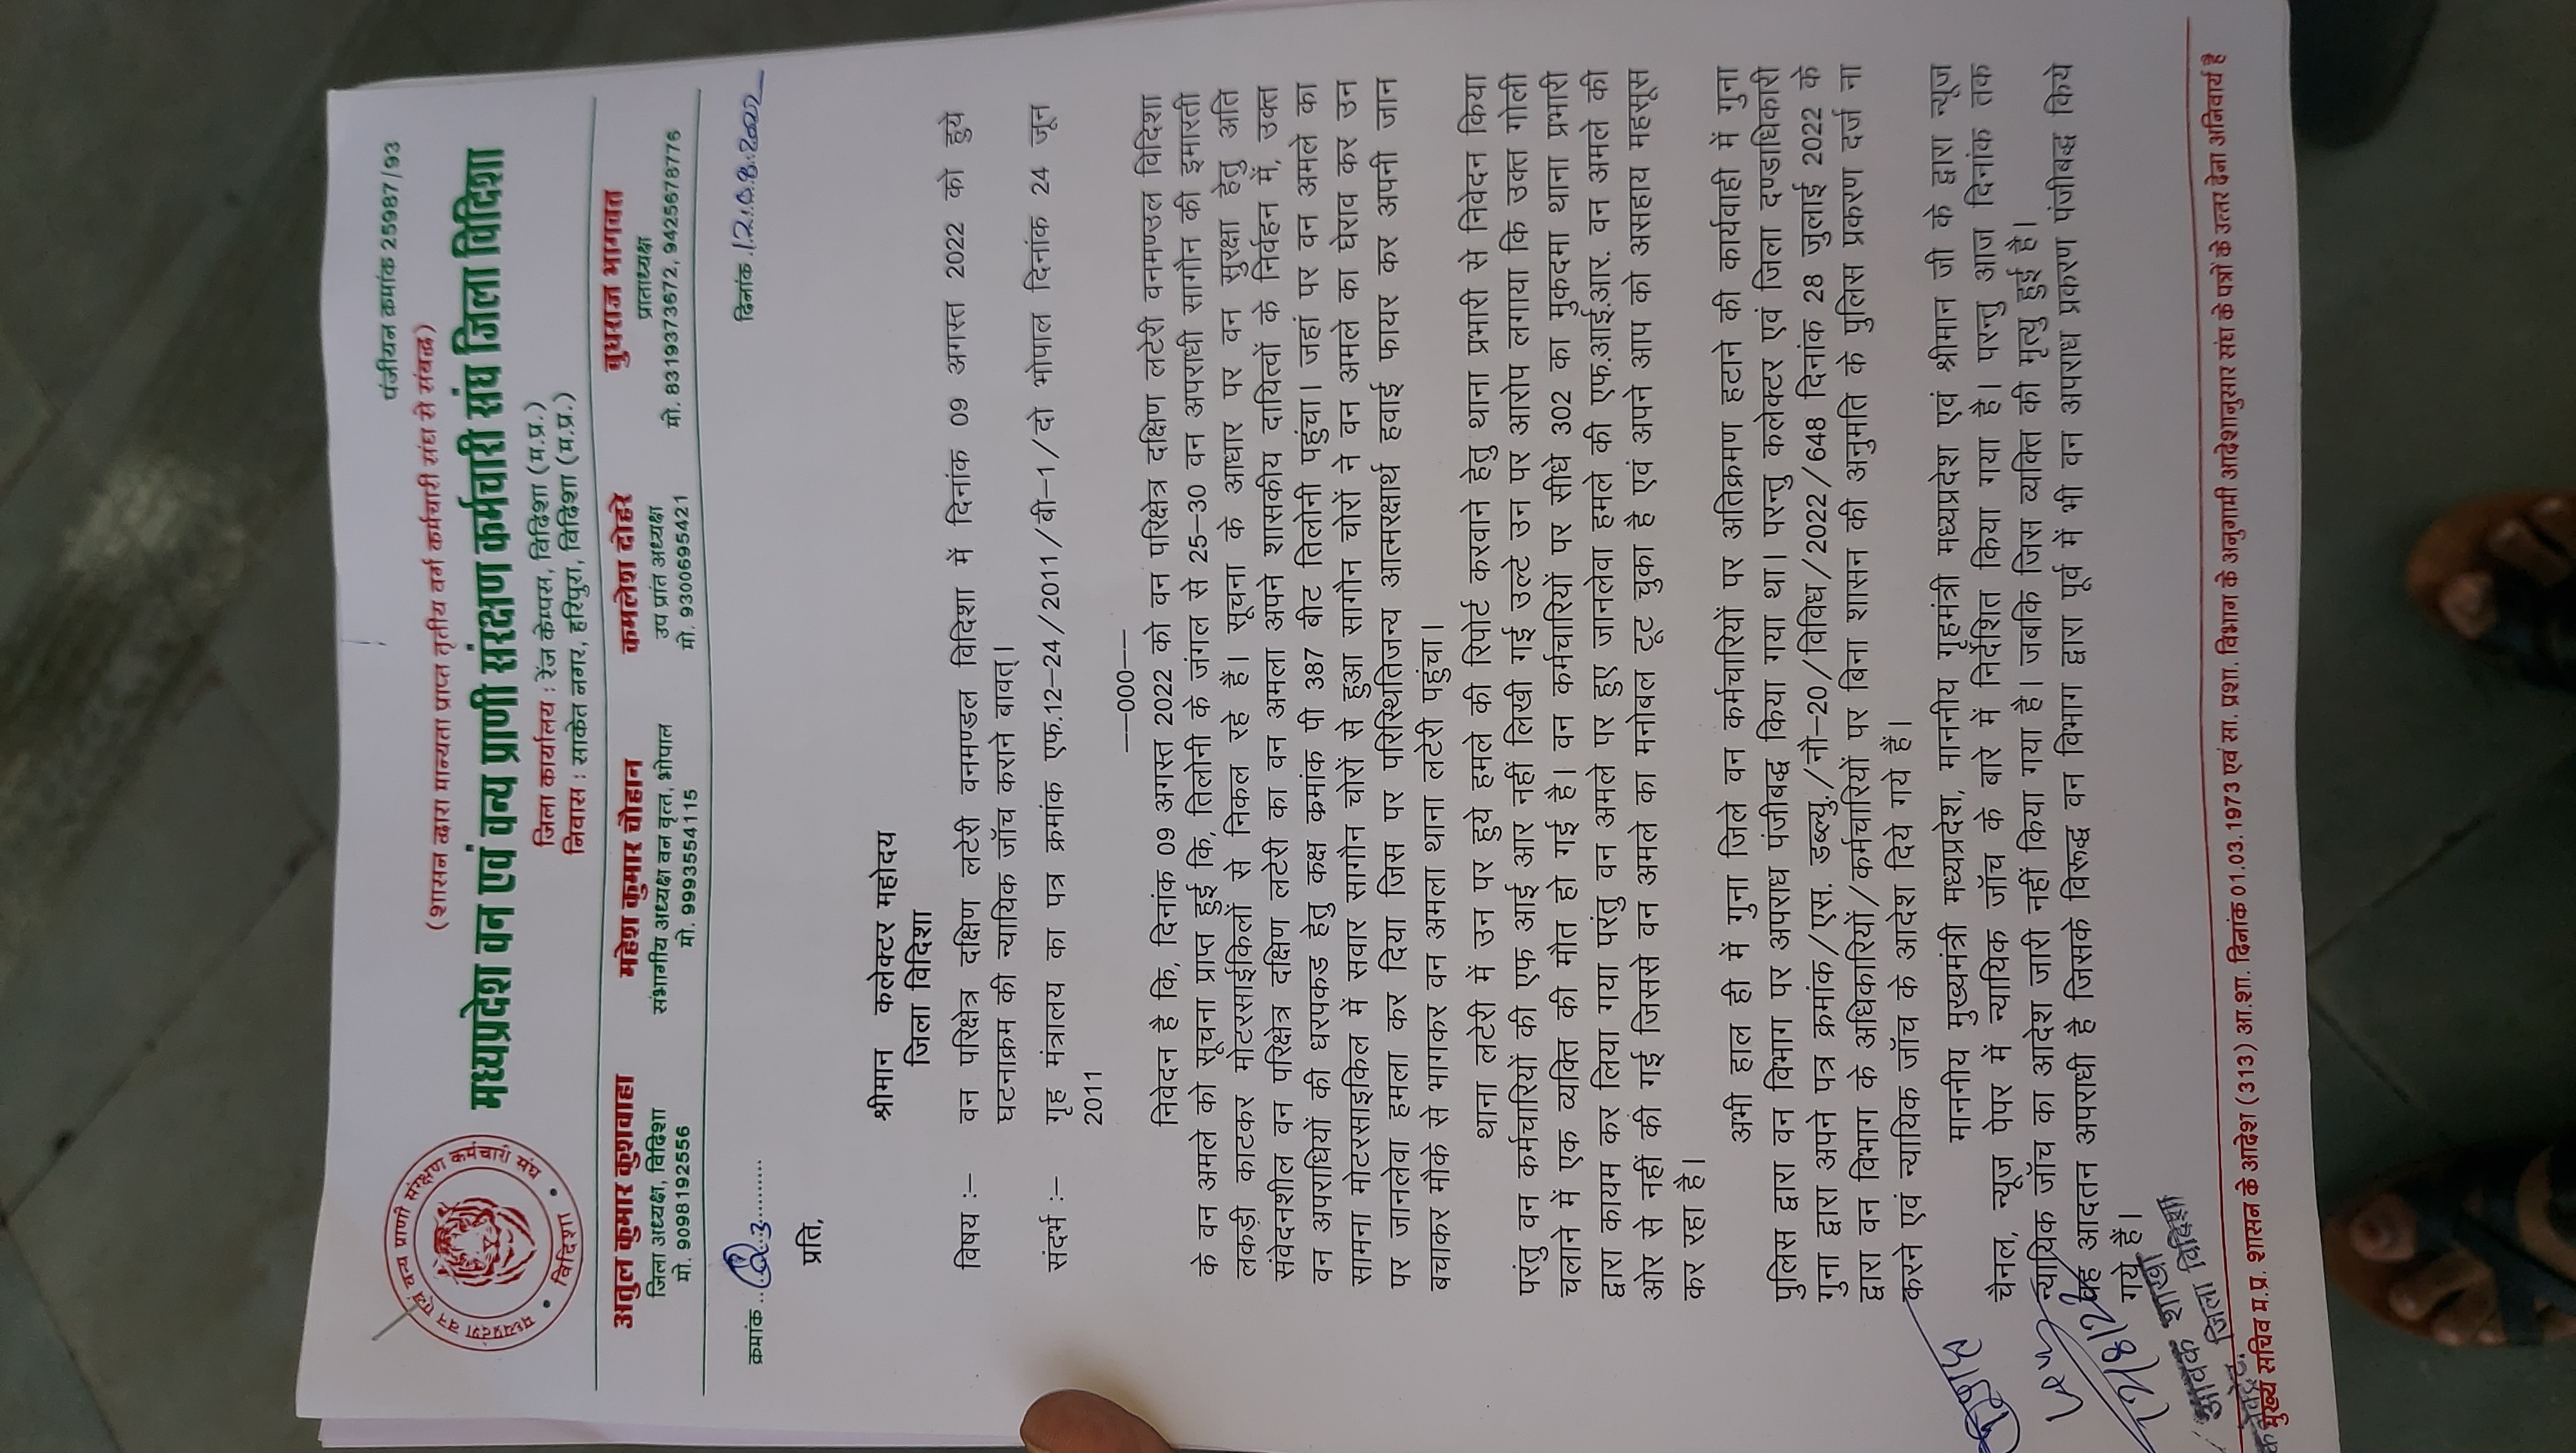 Memorandum submitted to Collector